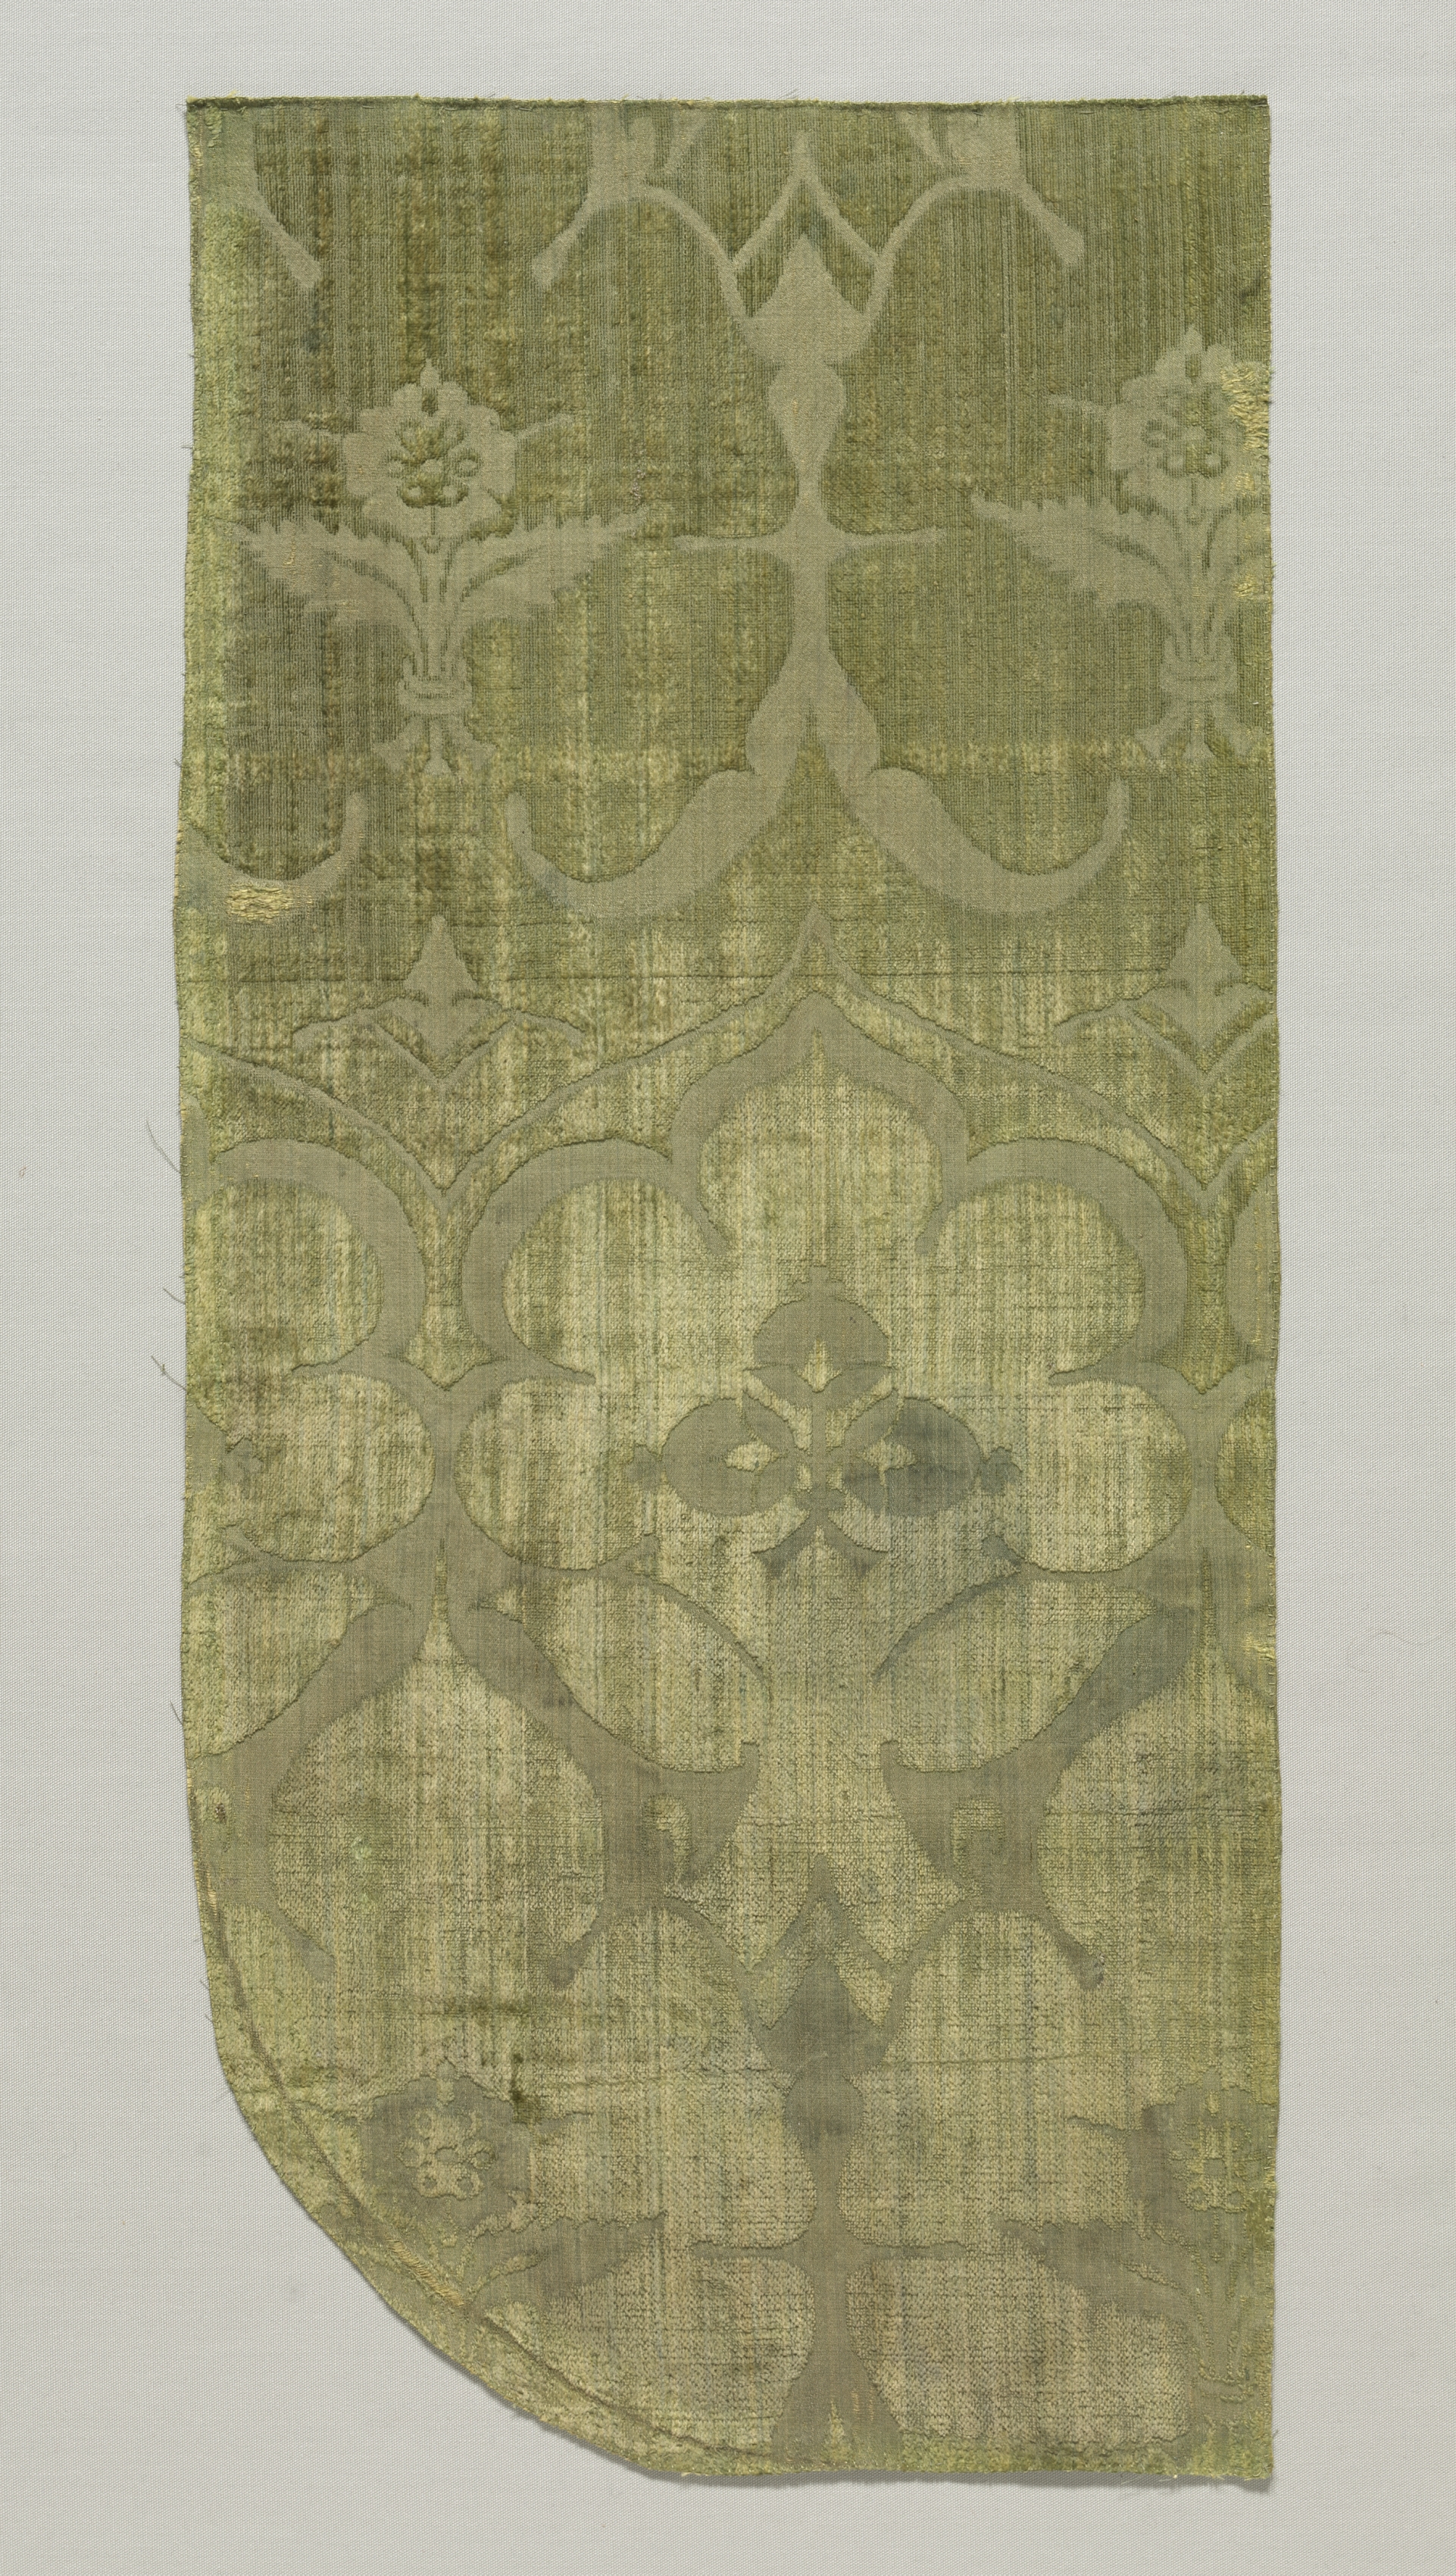 Fragment, probably from a Chasuble